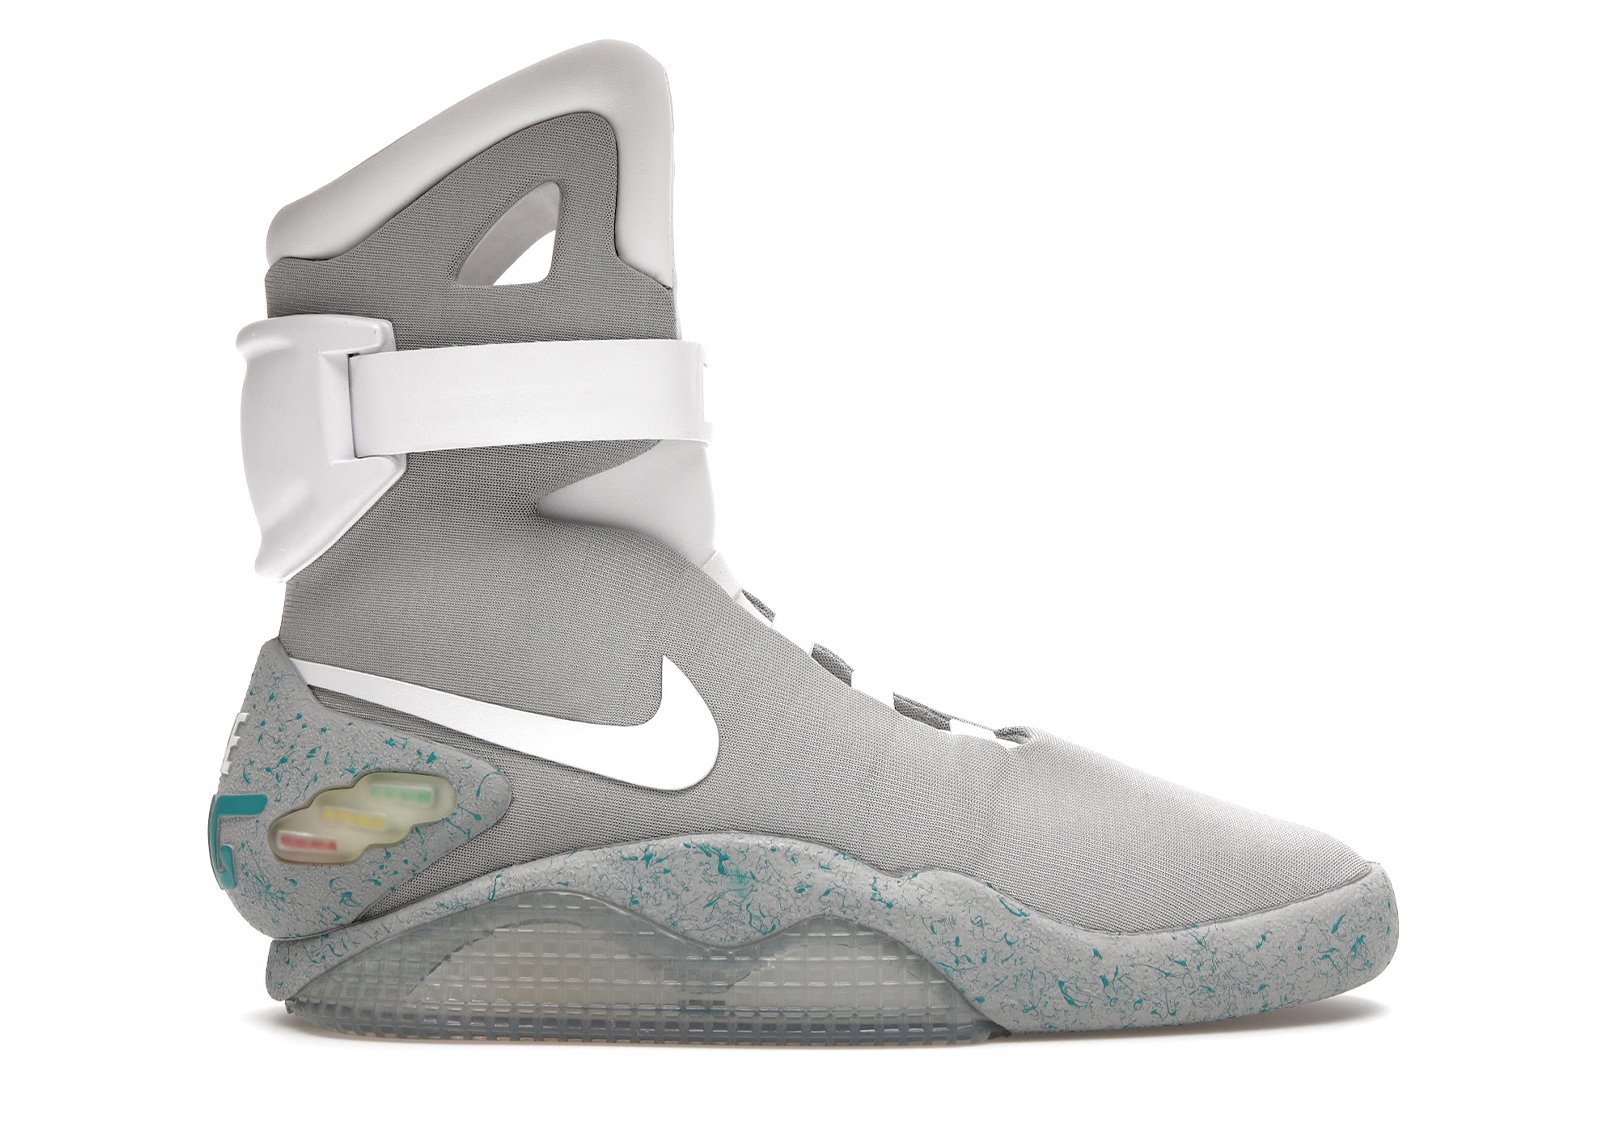 Nike MAG Back to the Future (2011) sneakers